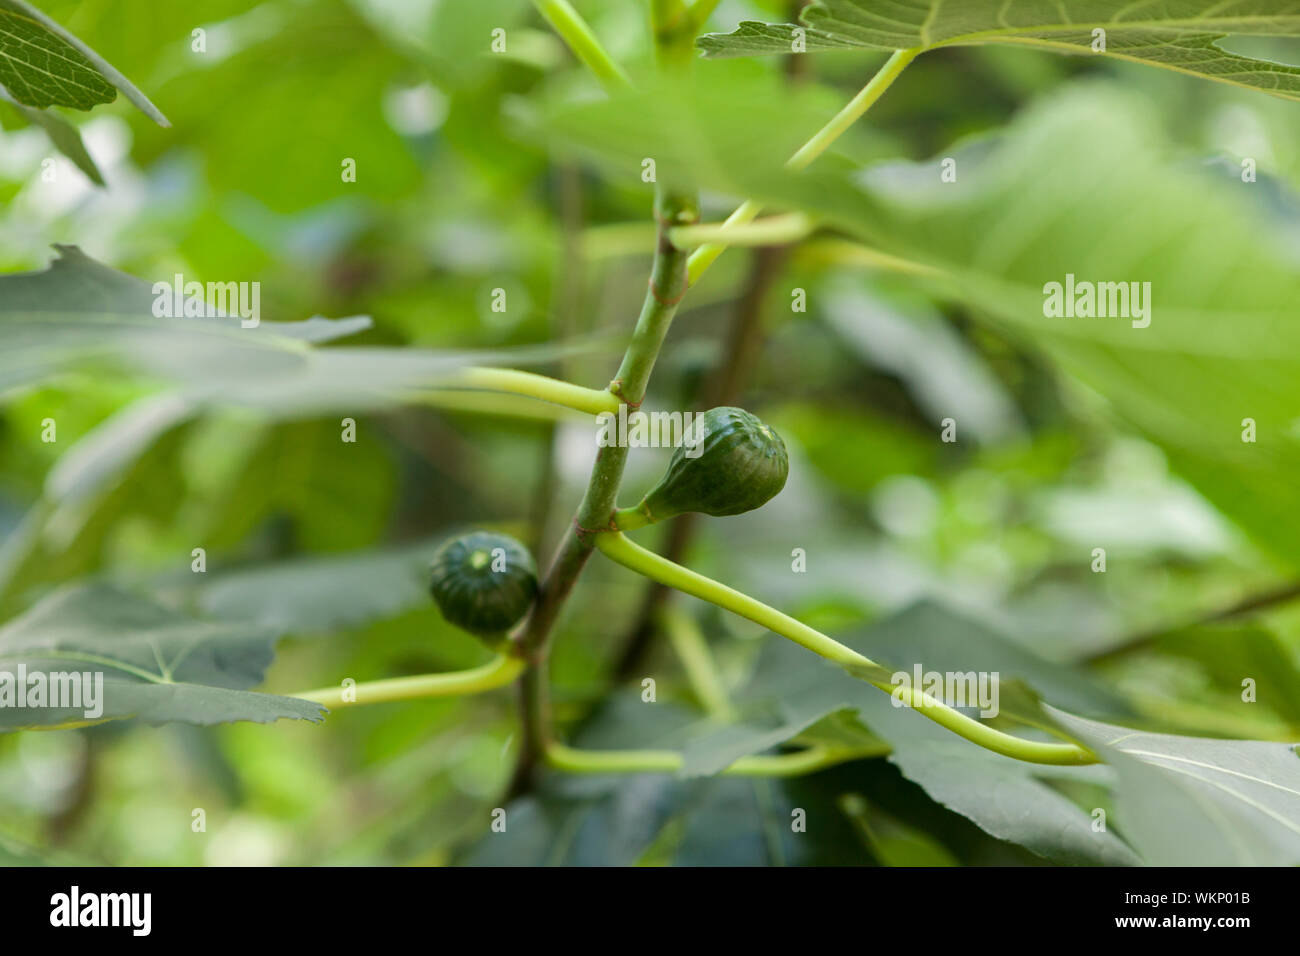 Botanical background of small green figs ripening on a Ficus carica tree against green leaves and sky Stock Photo